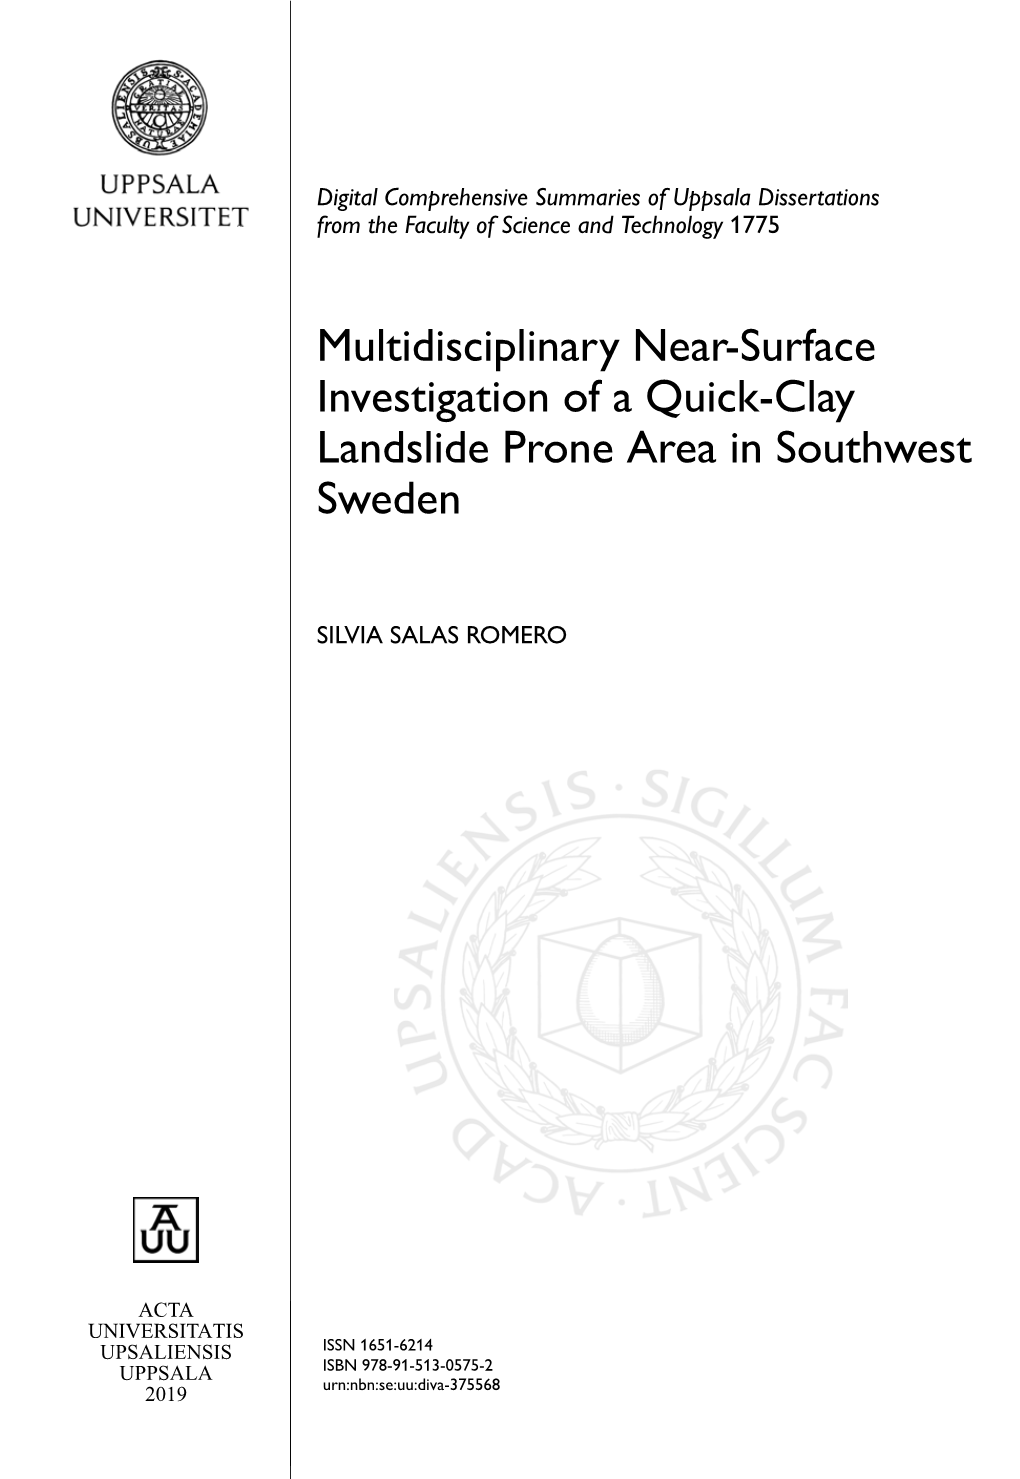 Multidisciplinary Near-Surface Investigation of a Quick-Clay Landslide Prone Area in Southwest Sweden